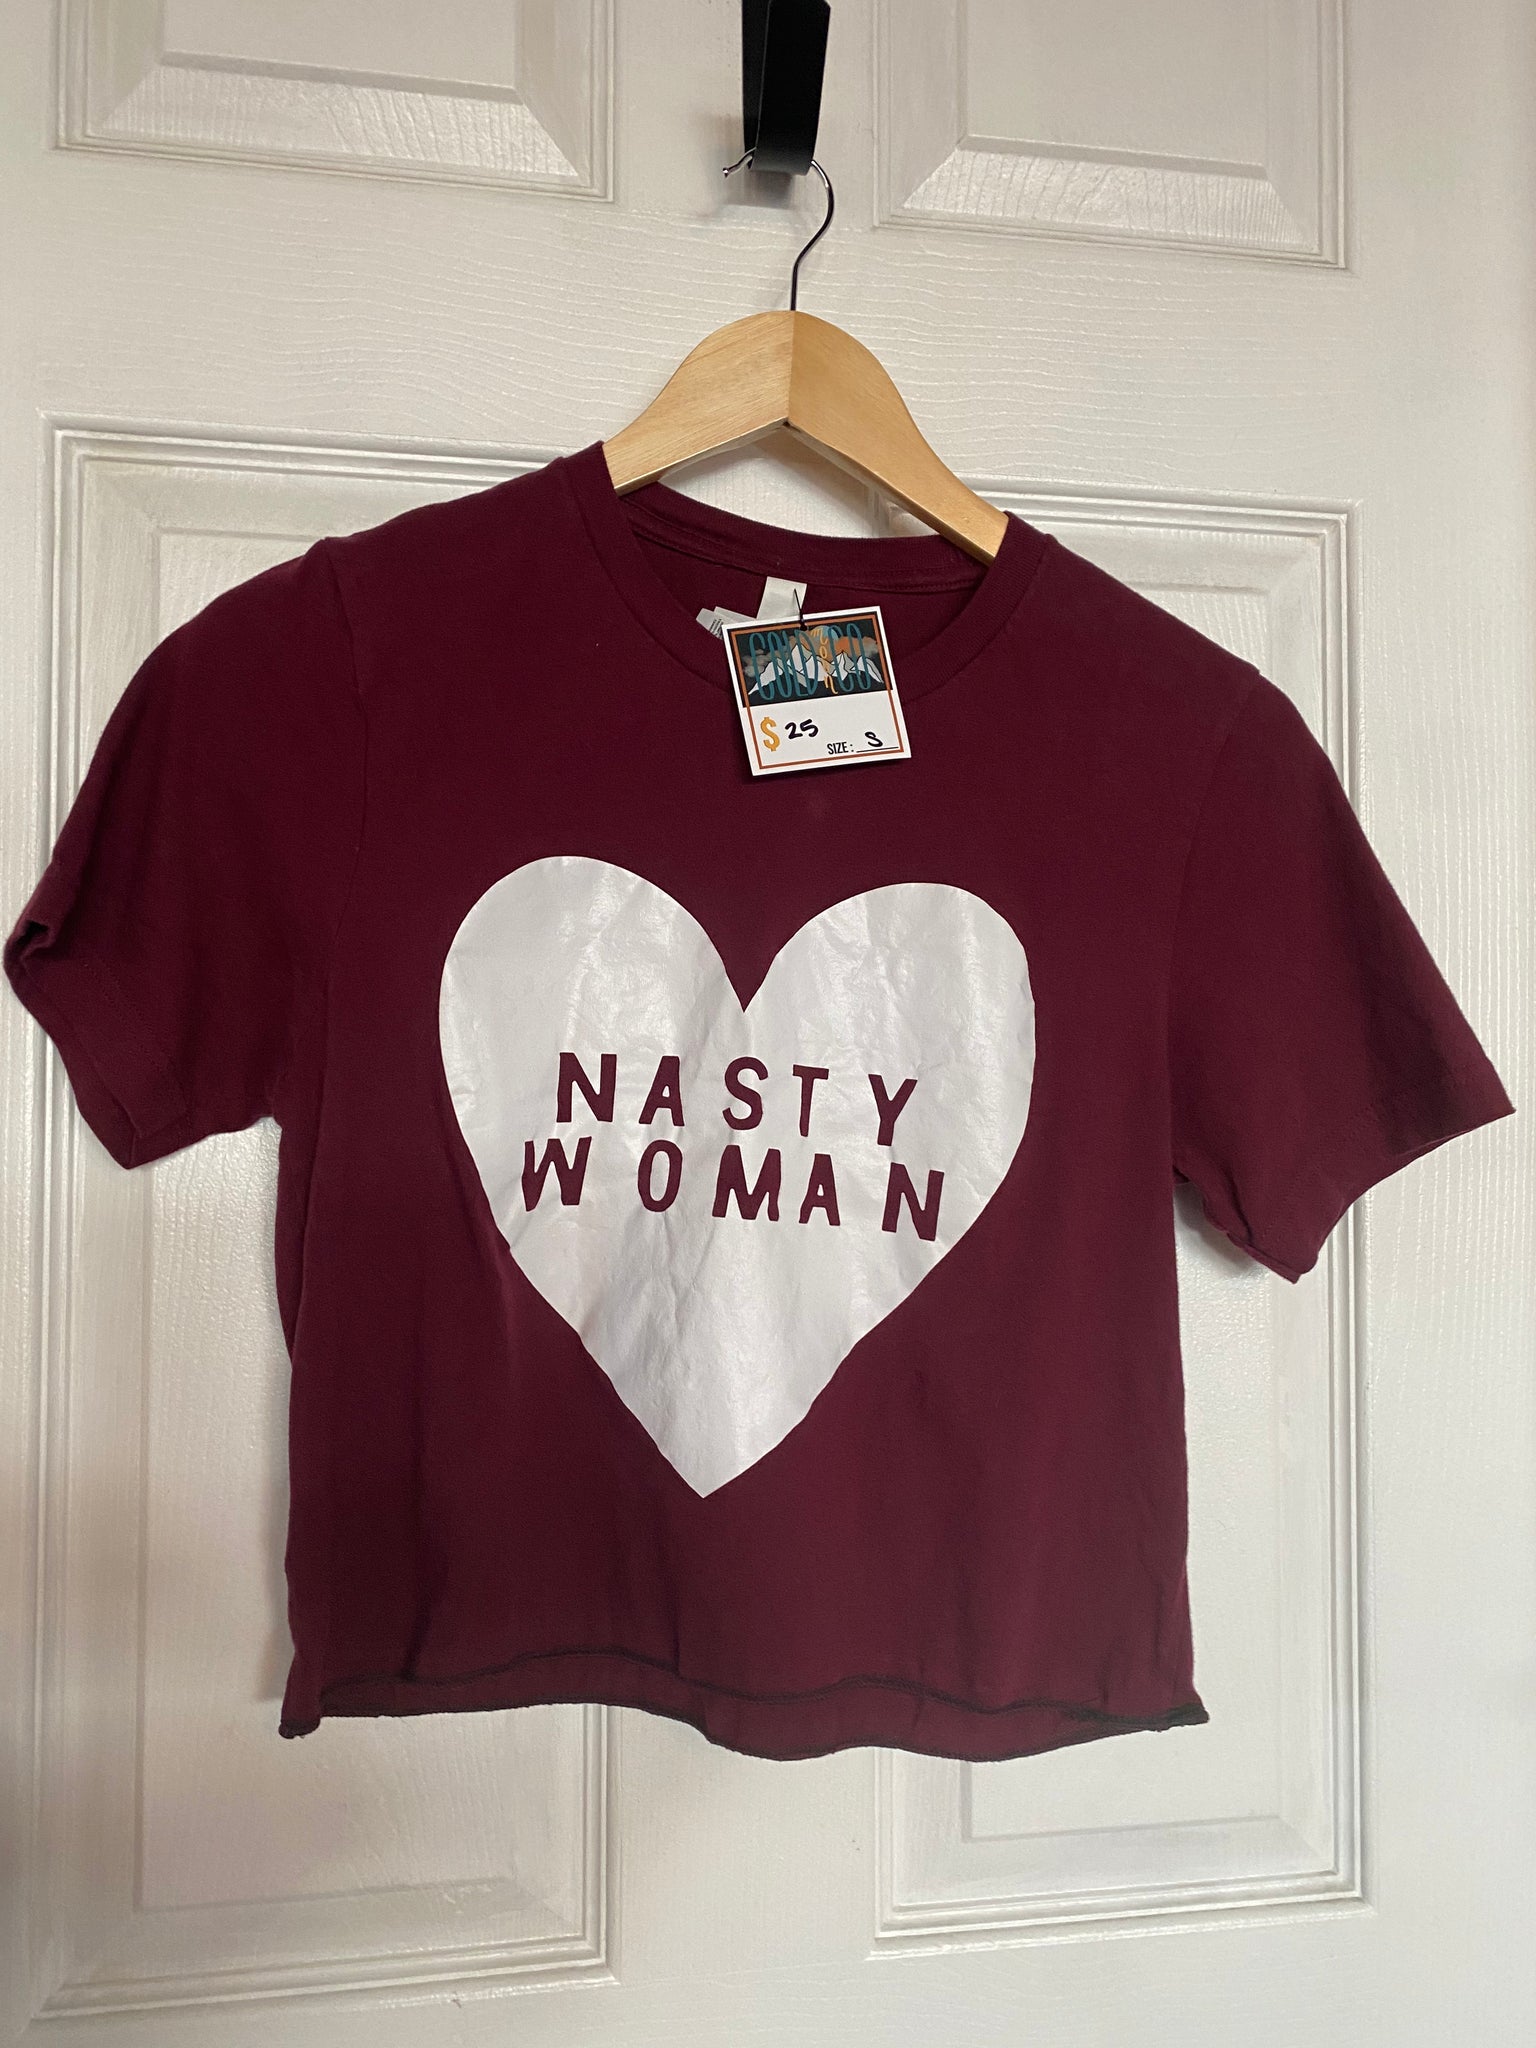 Cold Moon Cropped Shirt Nasty Woman L